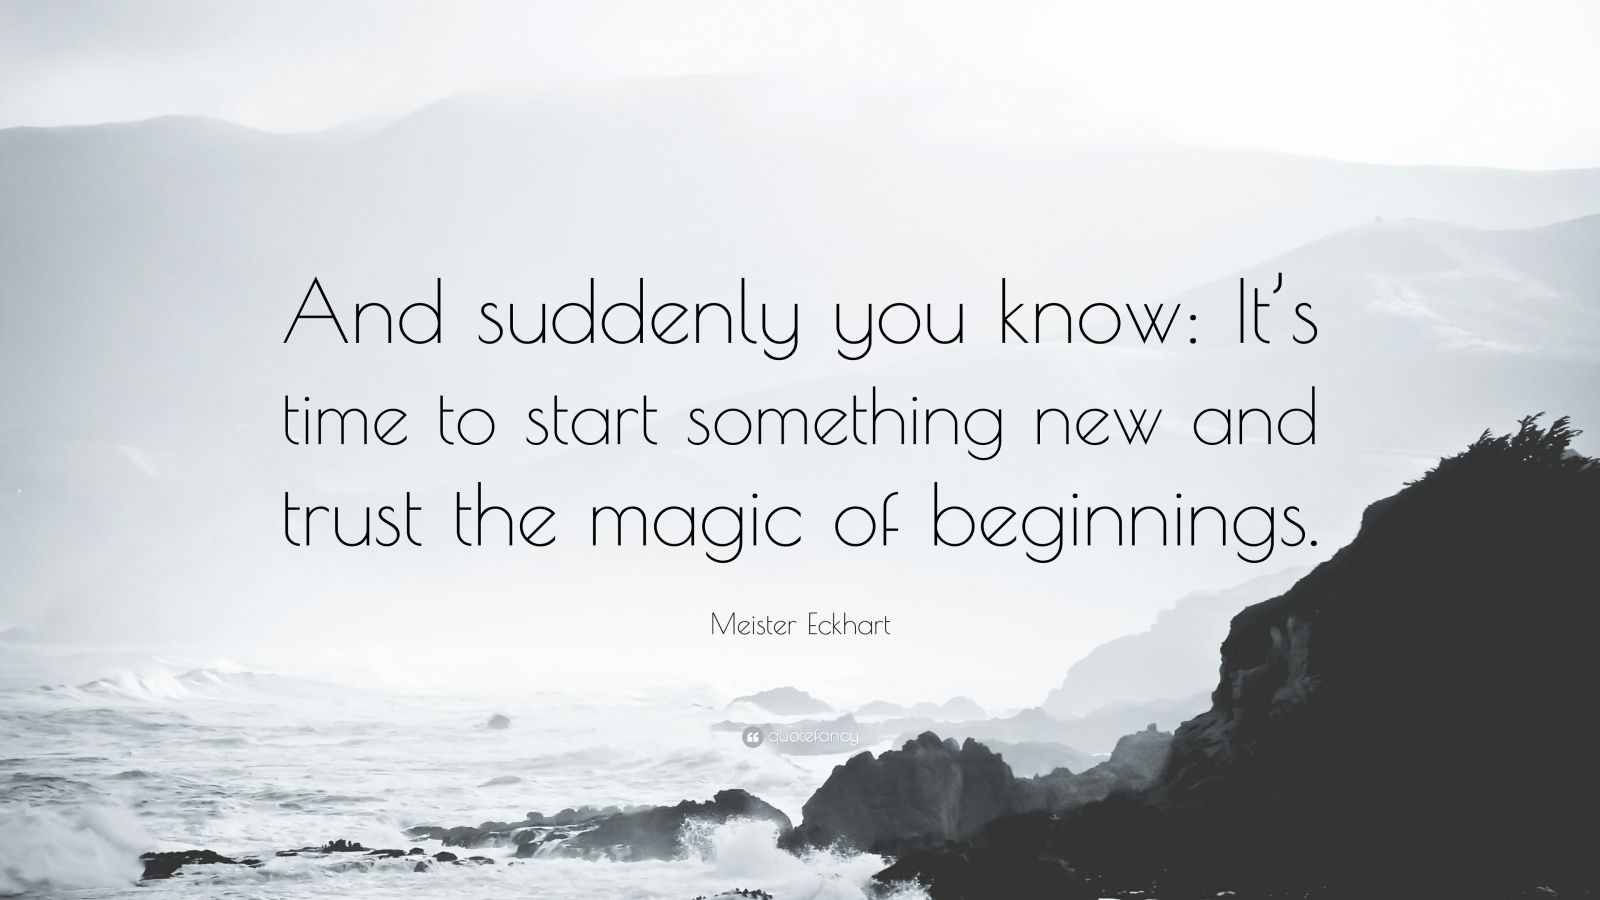 Meister Eckhart Quote: “And suddenly you know: It’s time to start